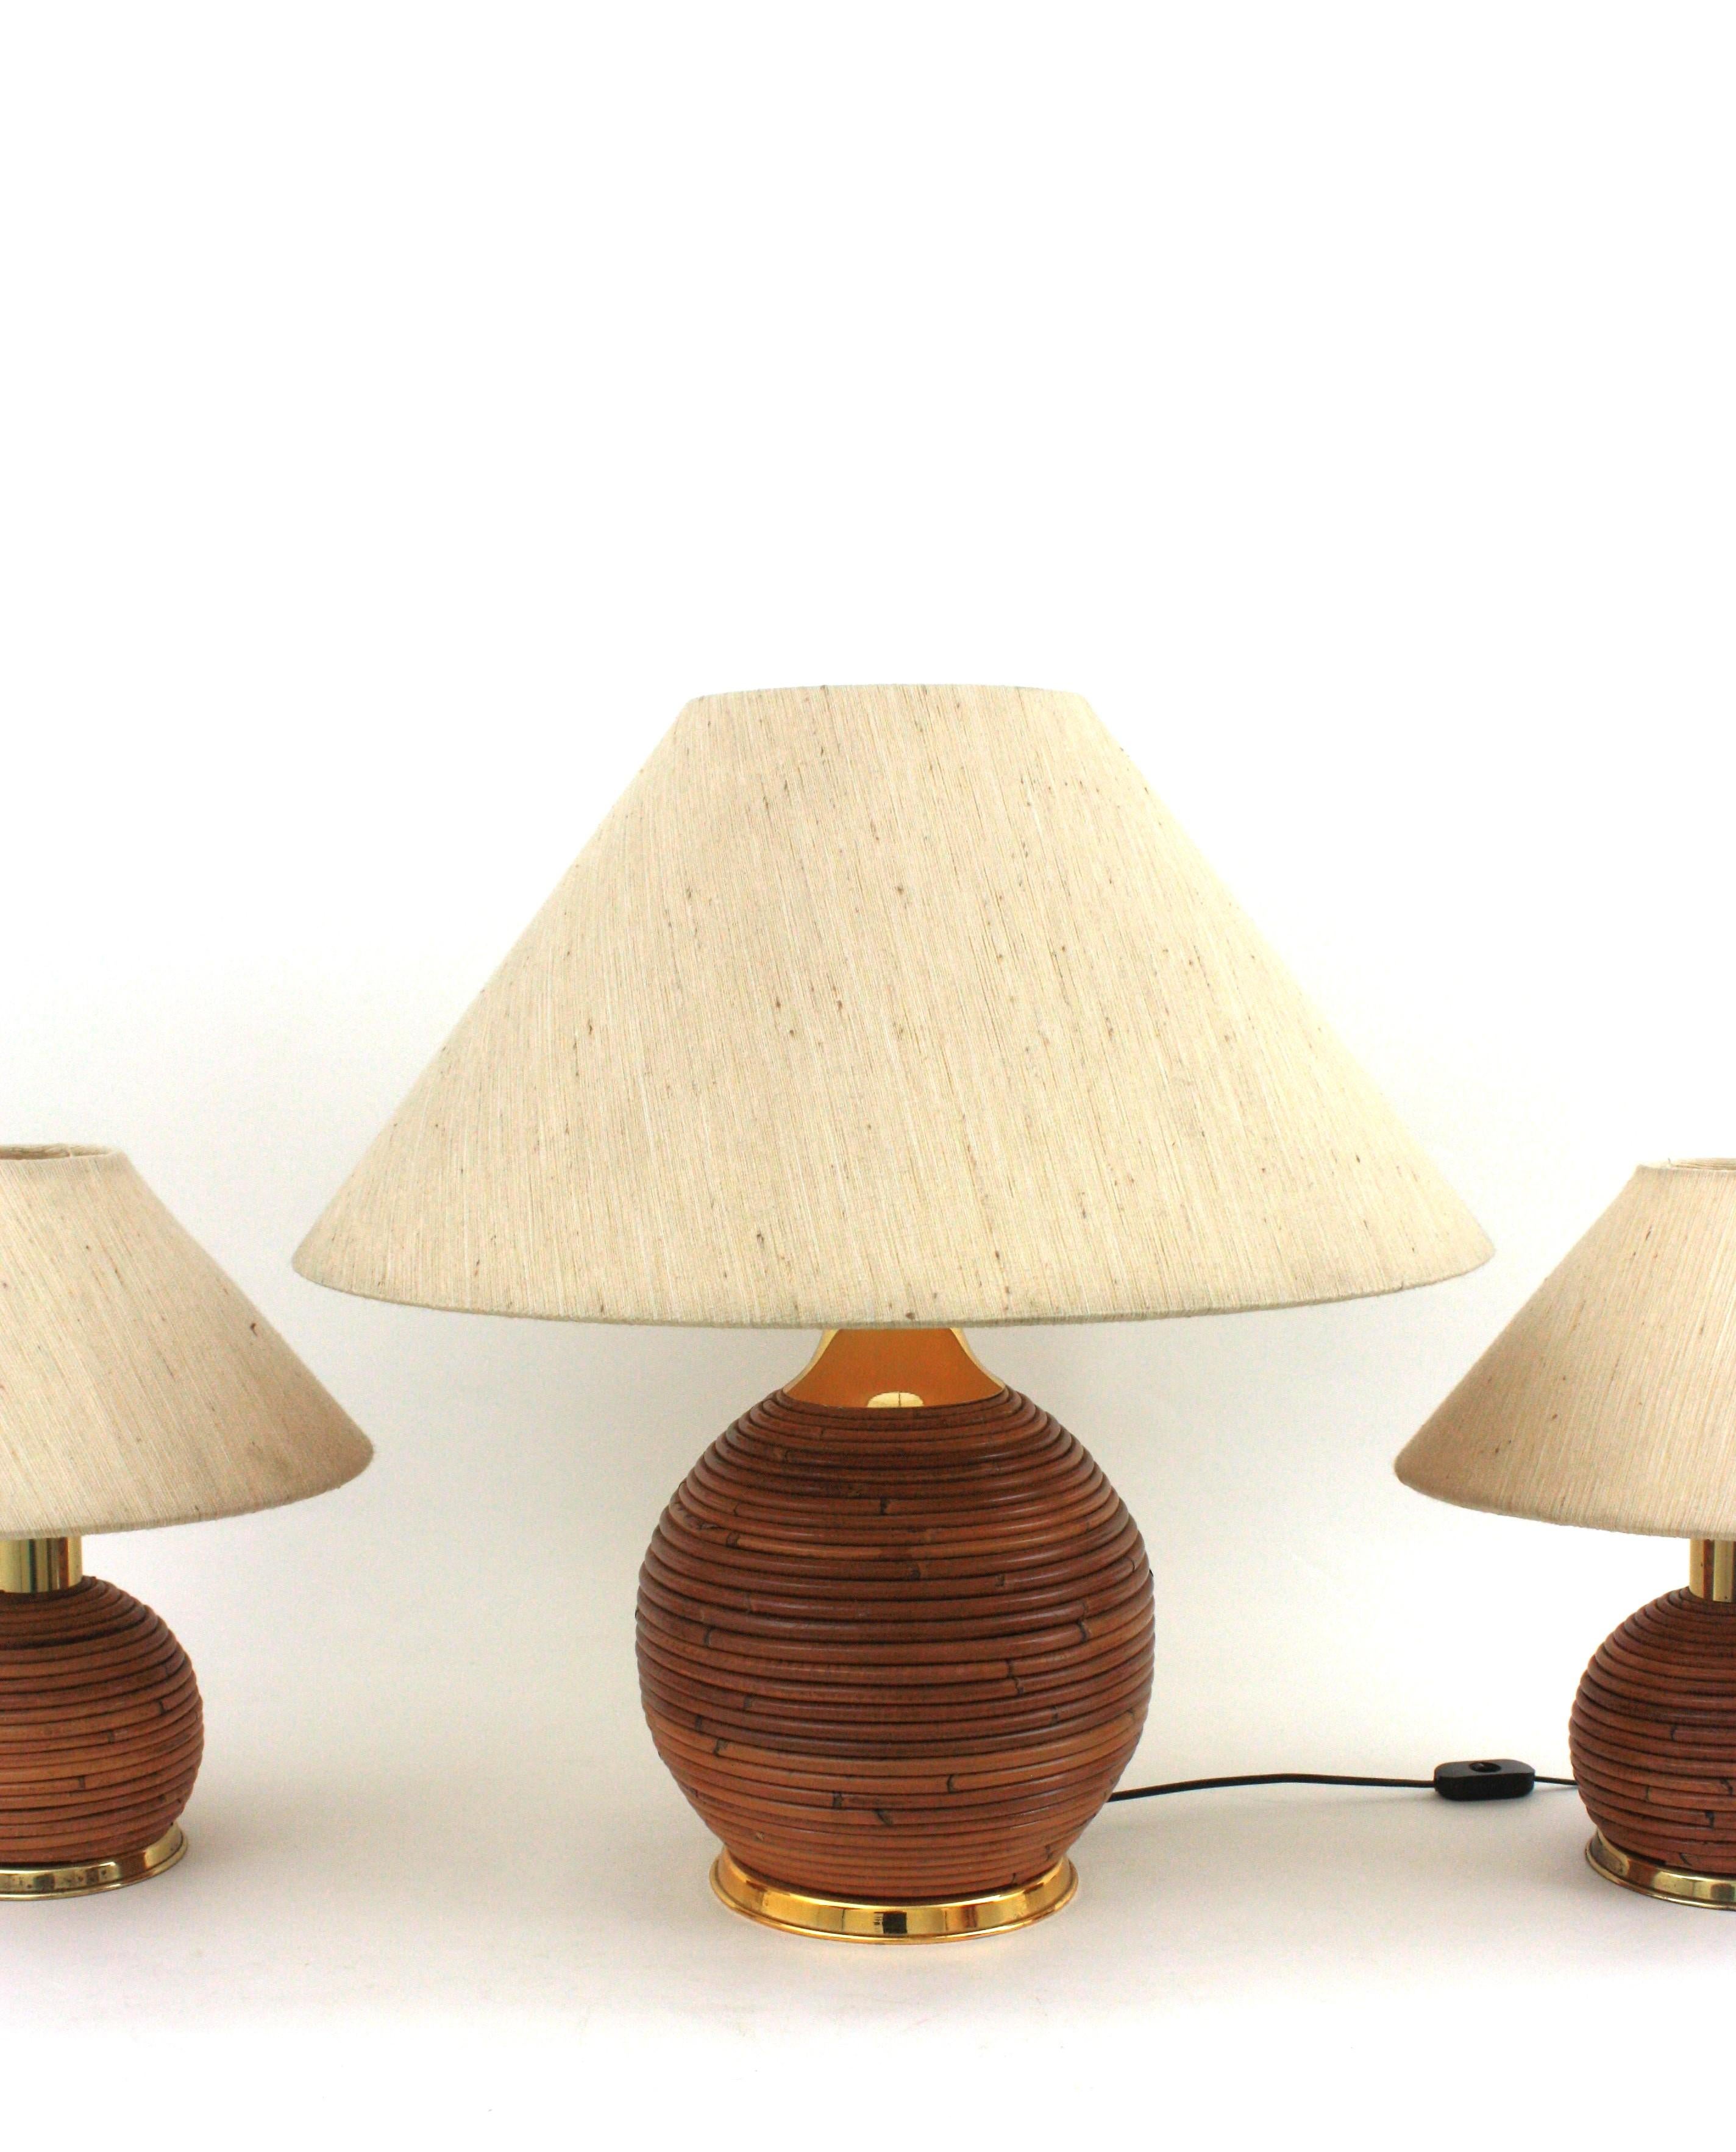 Large Italian Rattan and Brass Ball Table Lamp, 1970s For Sale 11